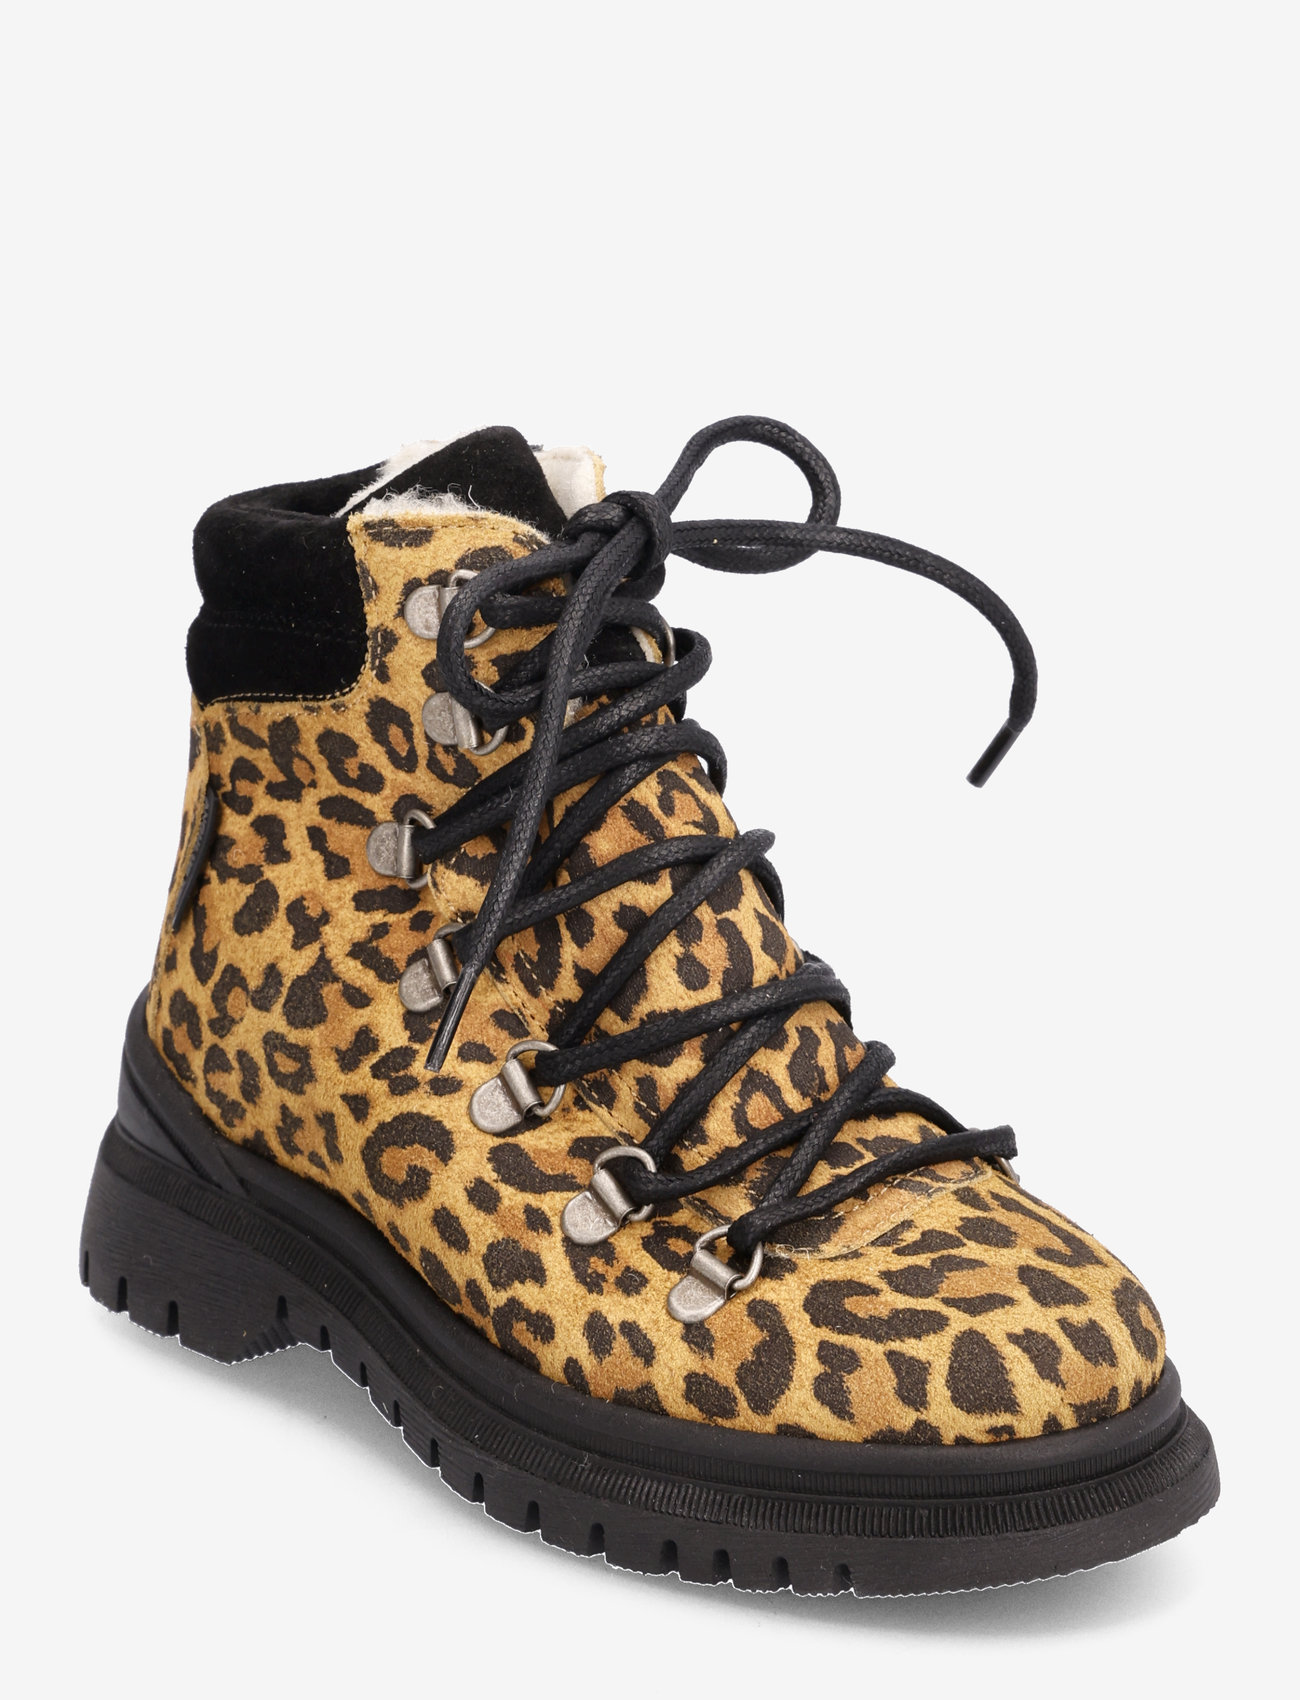 ANGULUS - Boots - flat - with lace and zip - børn - 1749/1163 beige leopard/black - 0